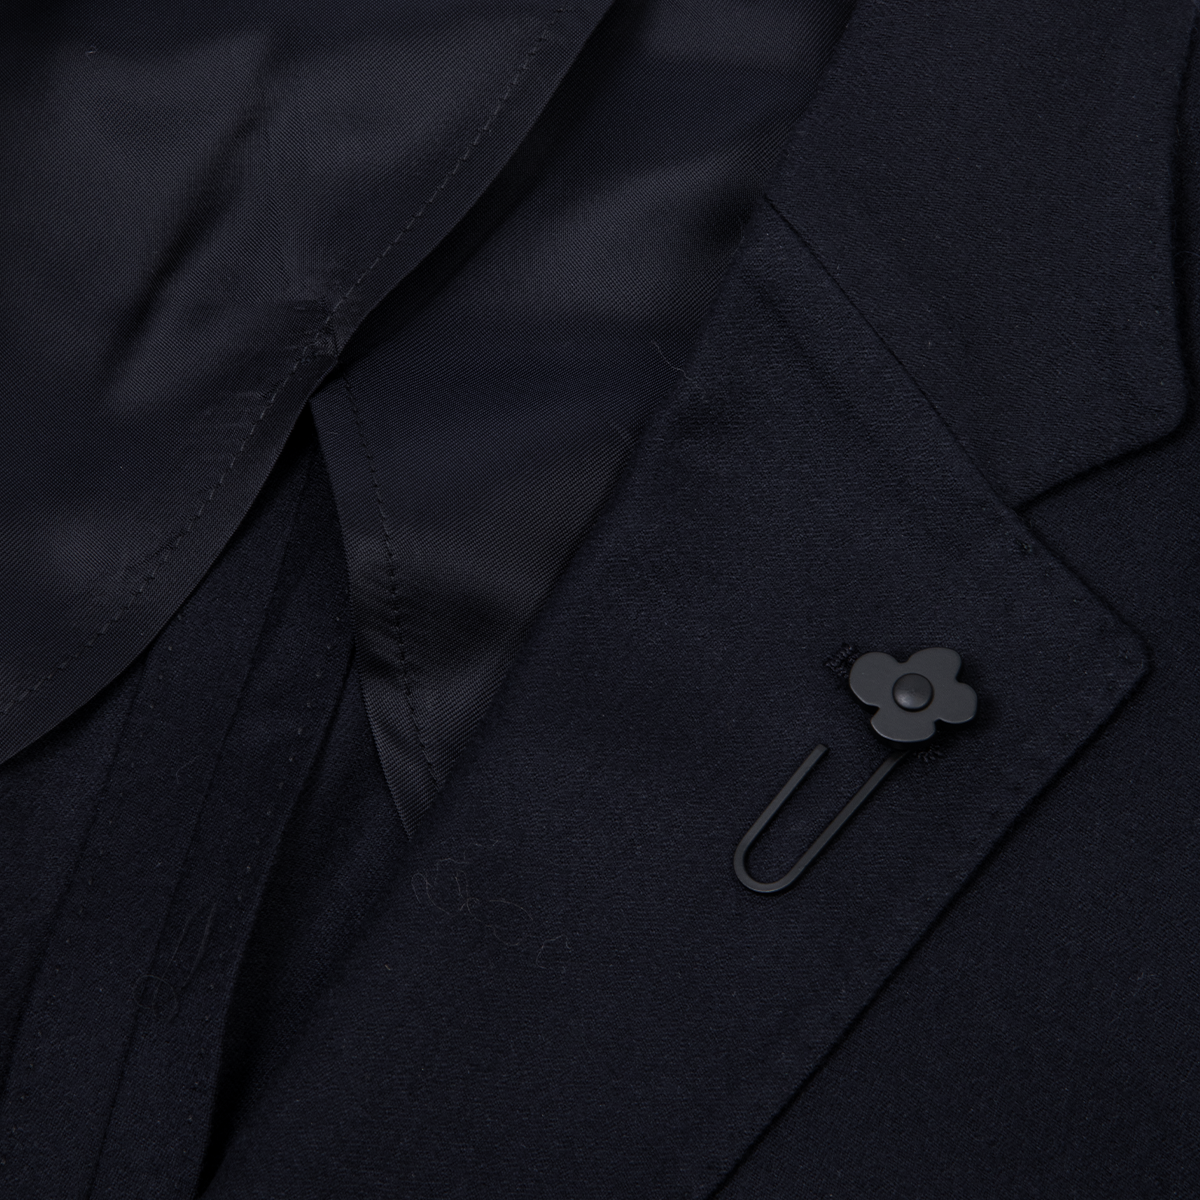 Cashmere Wool Suit - Navy